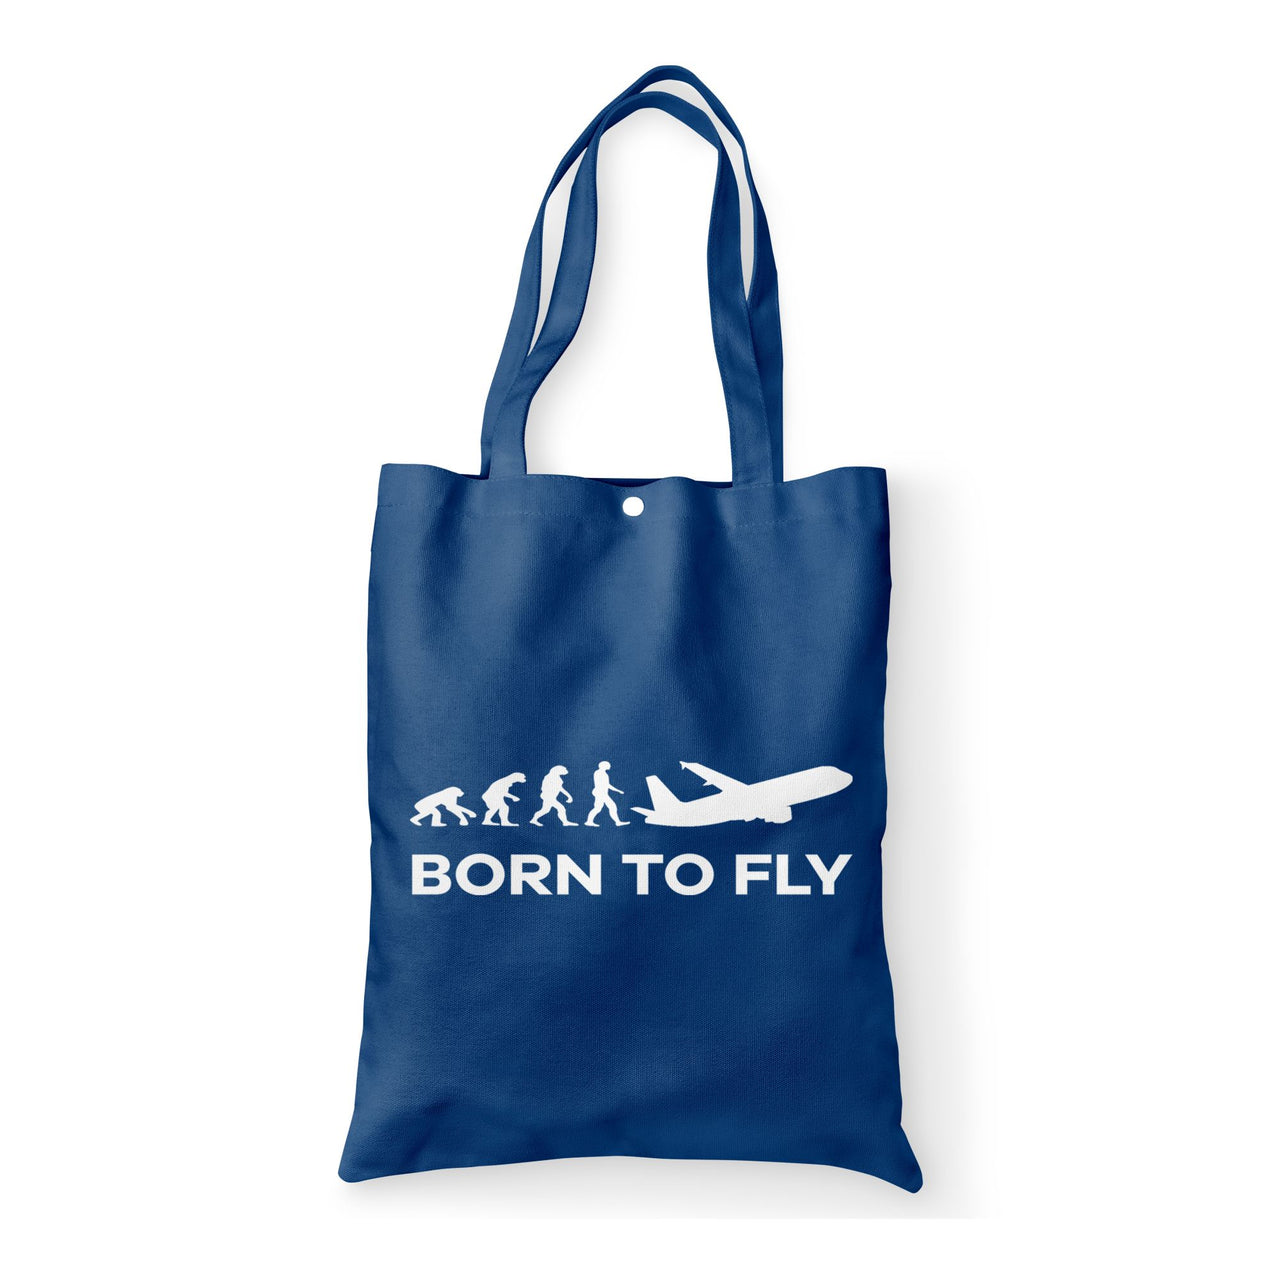 Born To Fly Designed Tote Bags